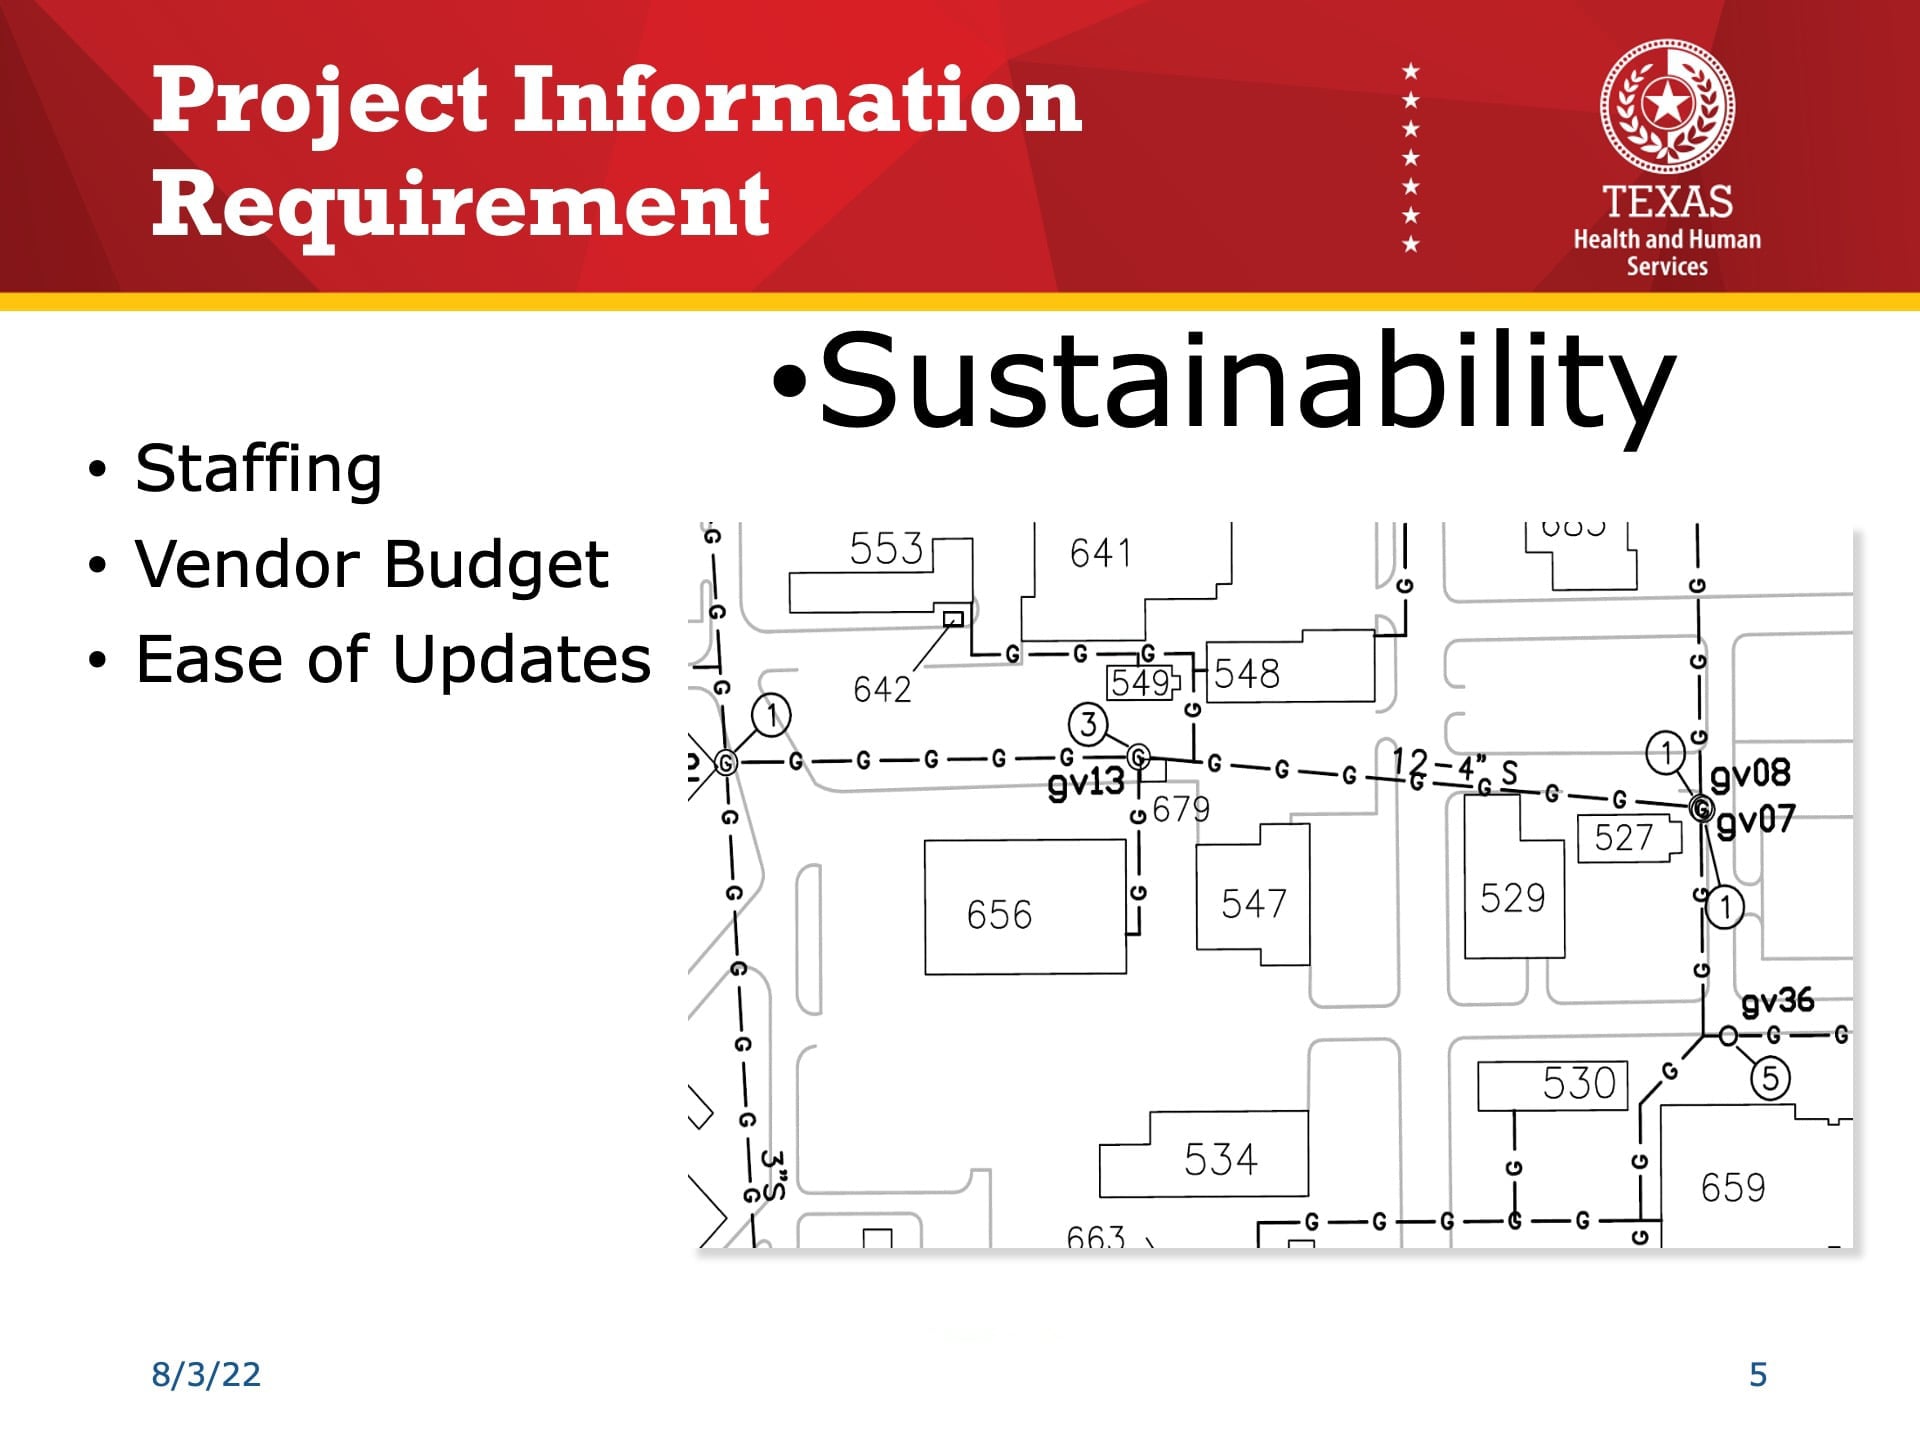 Esri UC 2022 Slide Reading: "Project Information Requirement: Sustainability." Bullet points include: "Staffing, Vendor Budget, Ease of Updates." A CAD drawing is shown to the right.